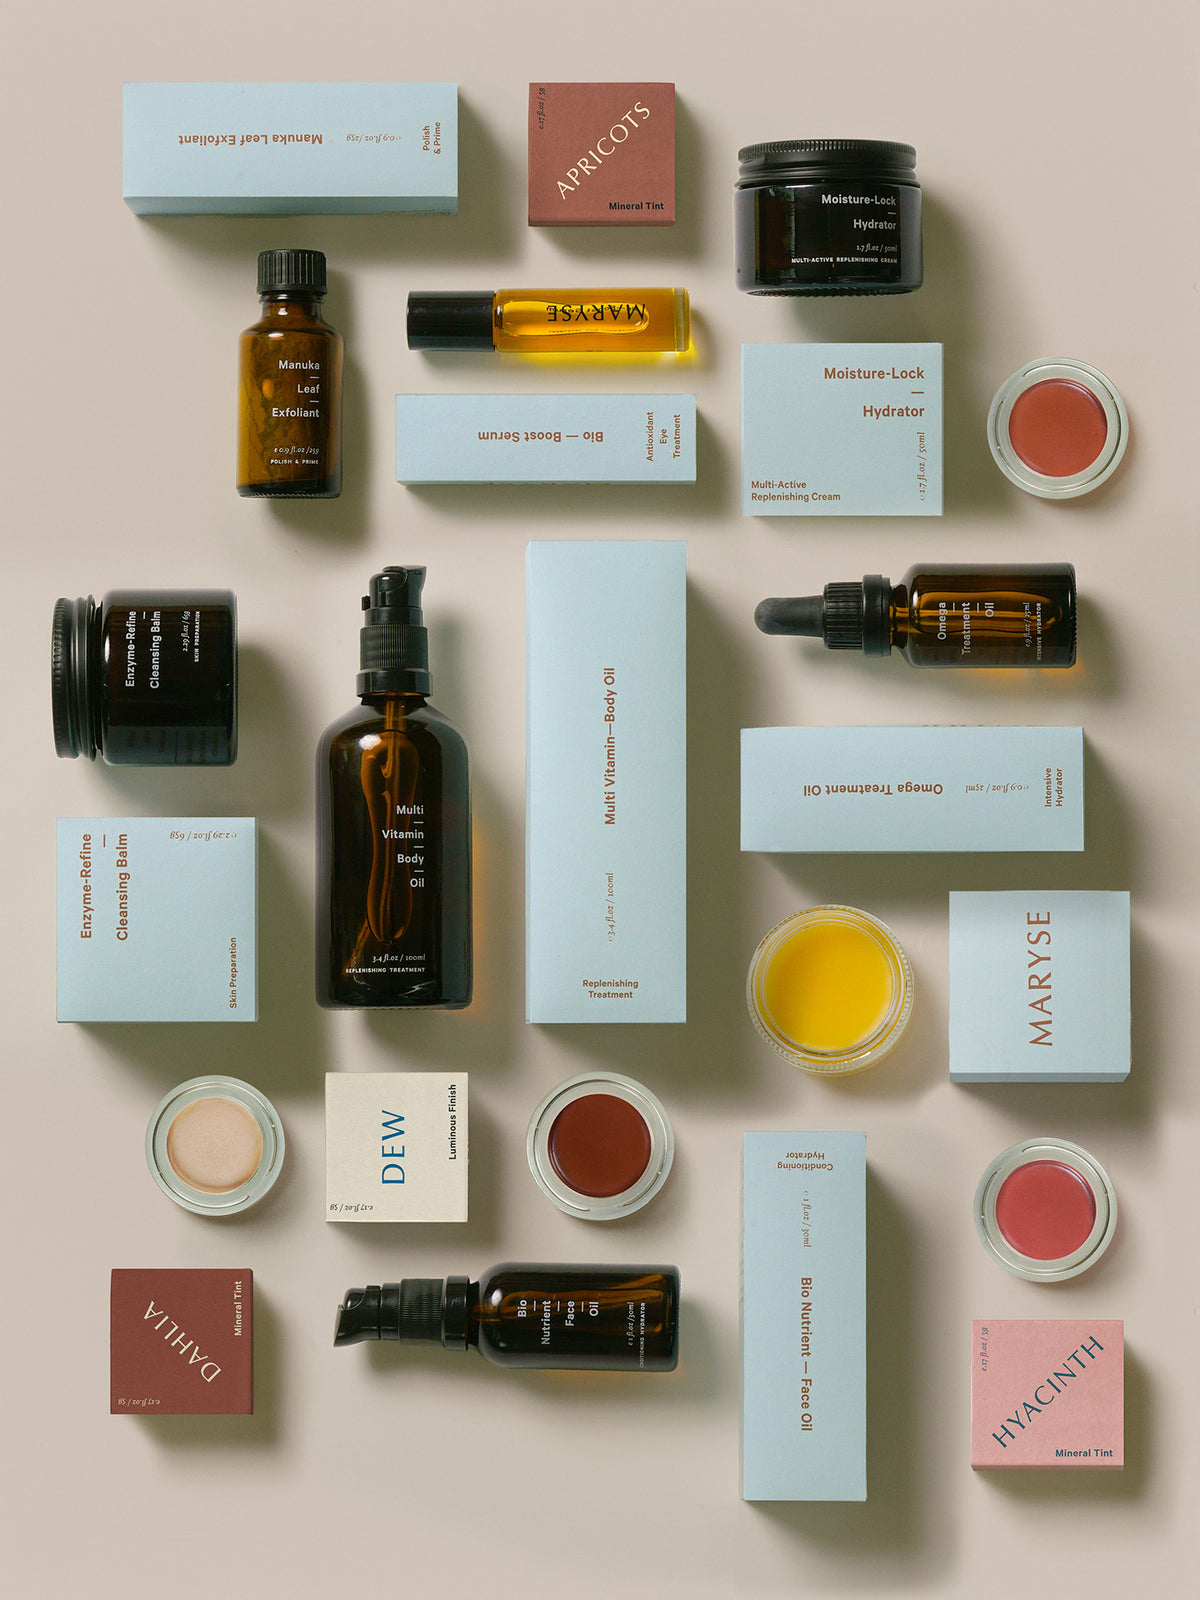 A collection of MARYSE cosmetic products arranged on a white surface, including Manuka Leaf – Exfoliant.